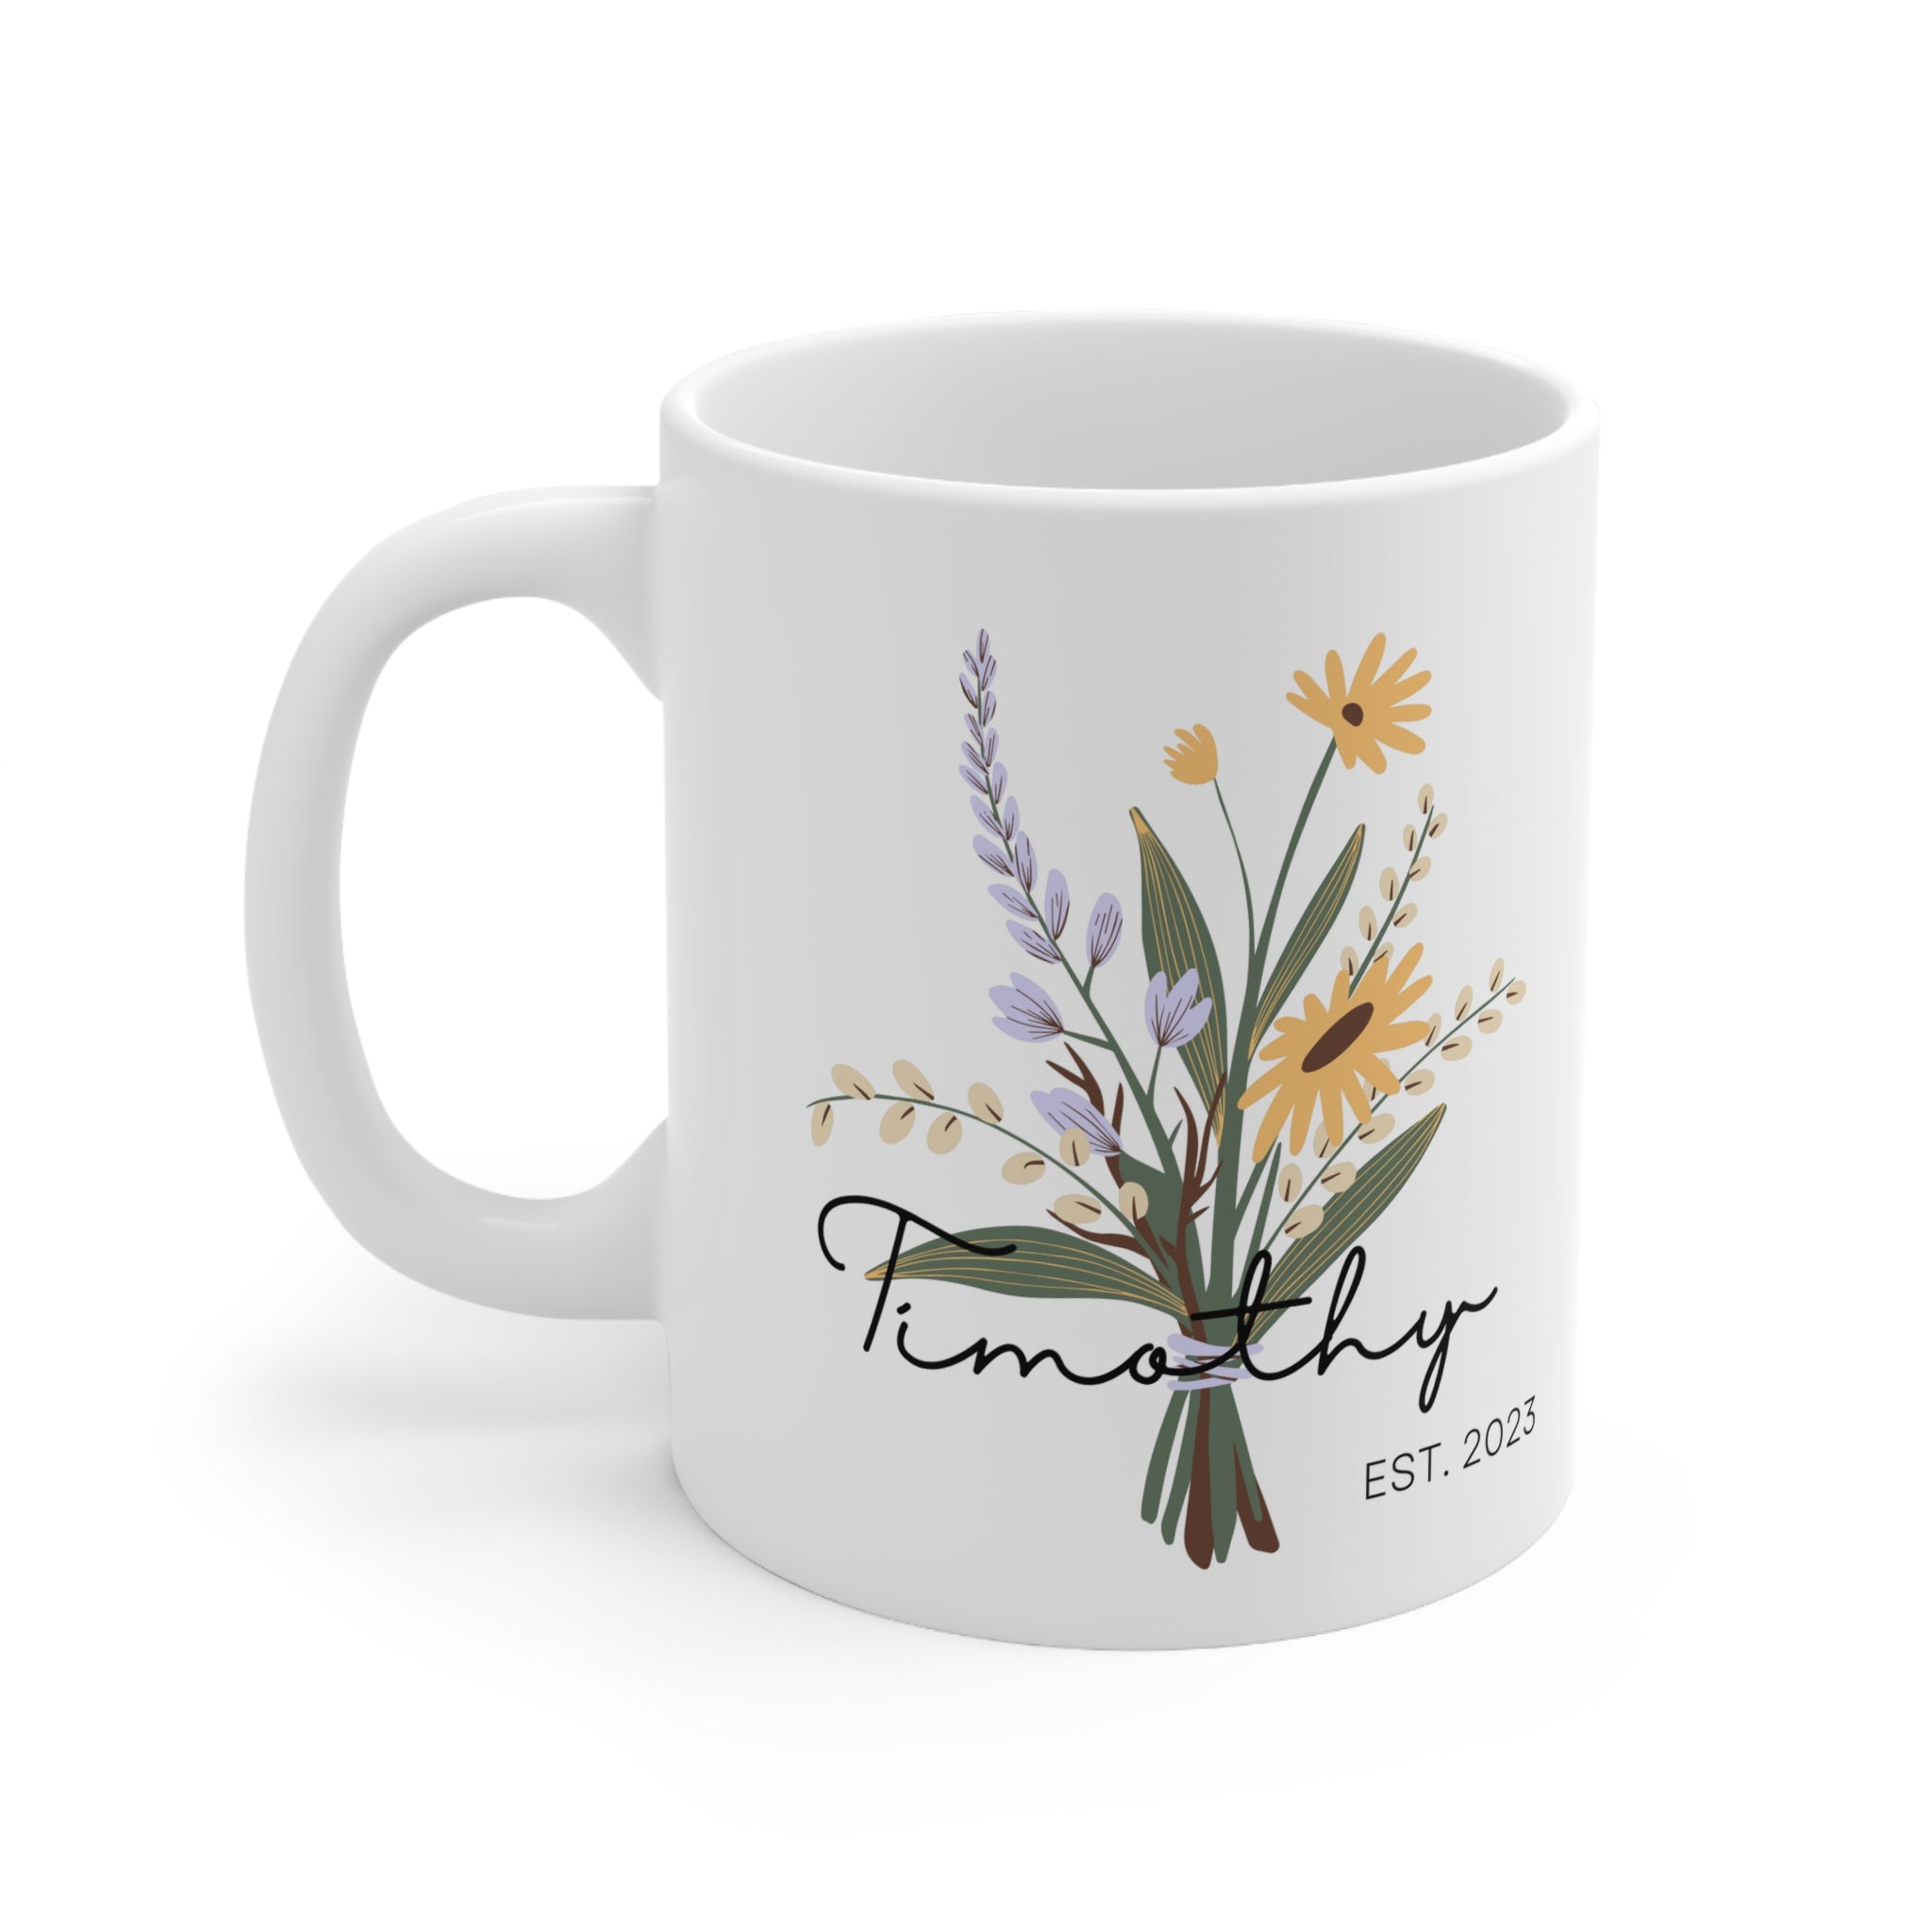 Great Gift for Work or for Coffee Breaks! Cherish Memories with Our Personalized Name and EST Date Floral Ceramic Mug 11oz - A Custom Keepsake to Sip and Smile